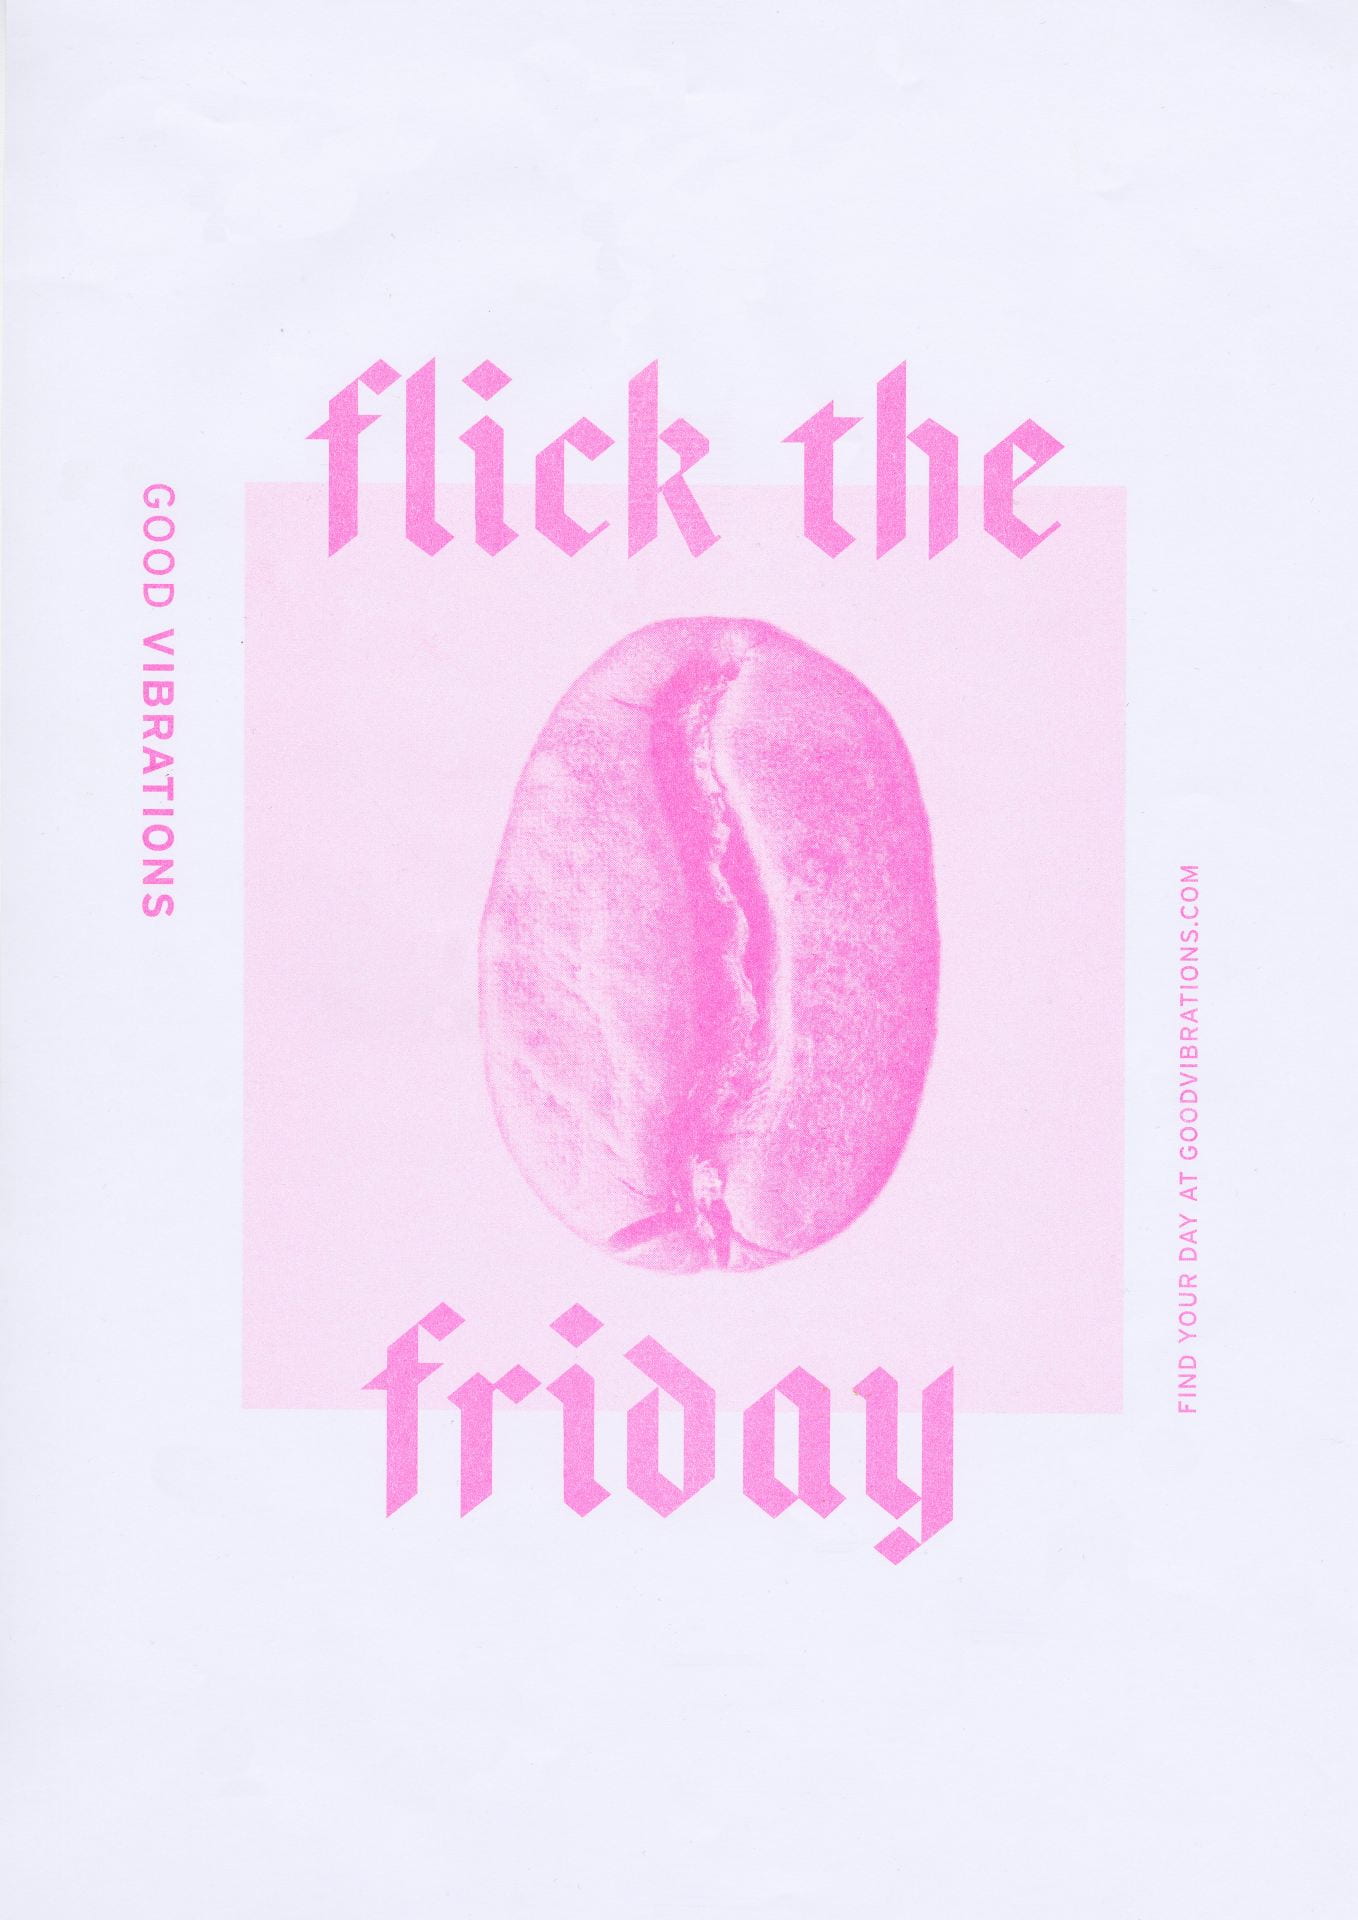 Flick the friday poster in pink tones with a coffee bean